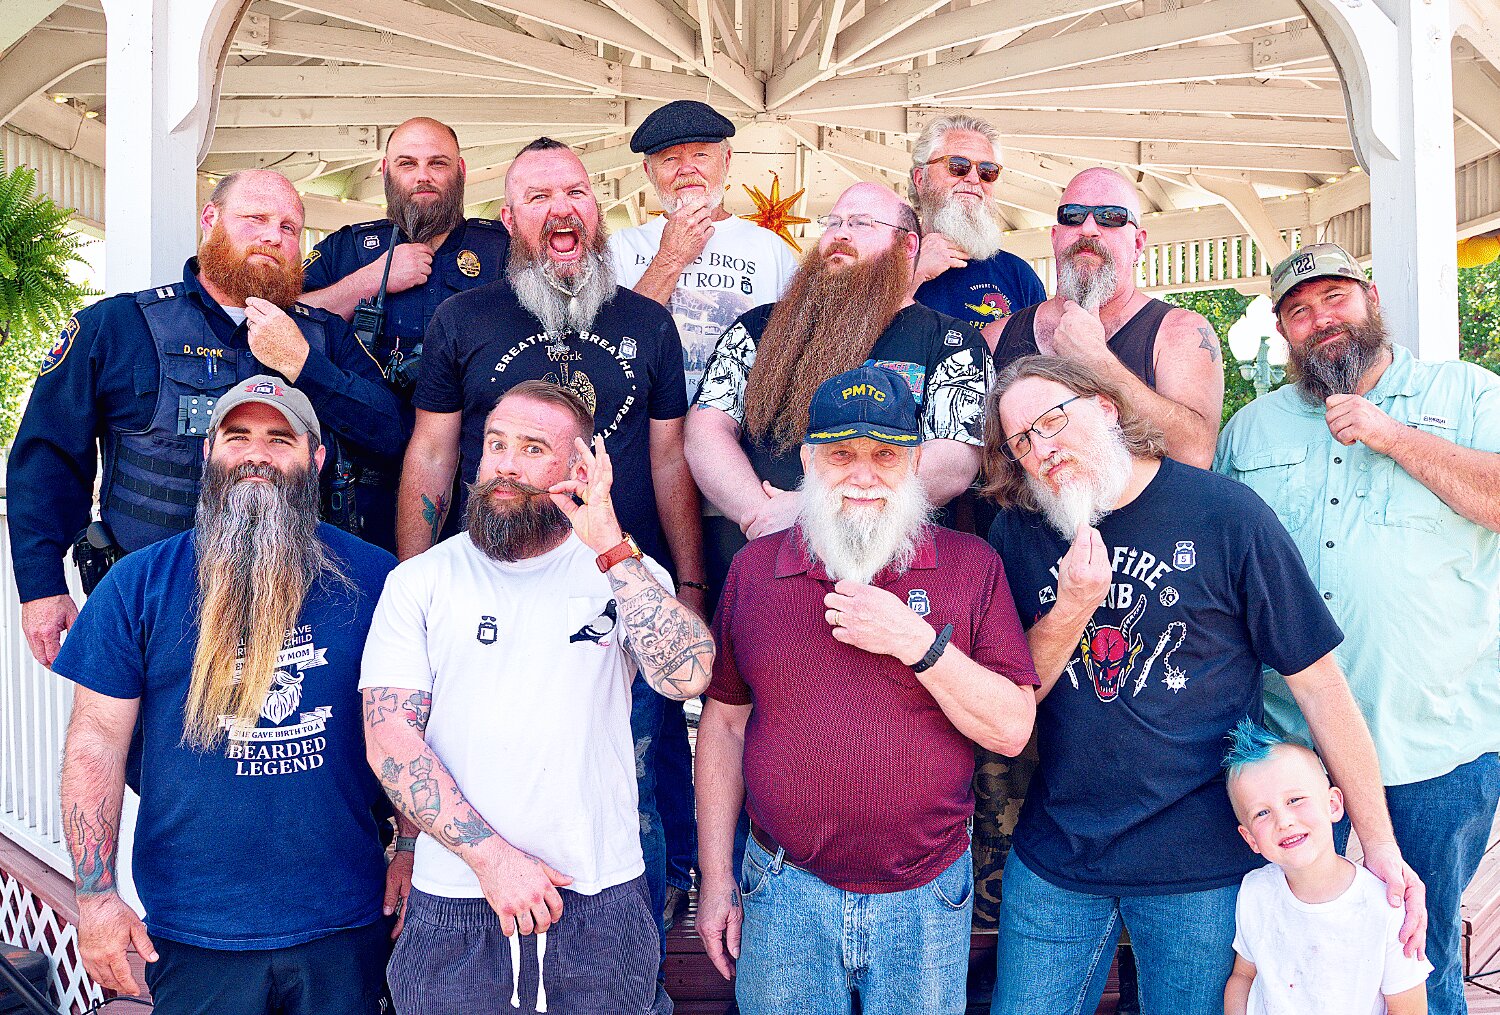 Bushy, sculpted, whispy or coarse – the competitors in the beard master competition all brought something unique on their chins to the gazebo in downtown Mineola. [see so many more sesquicentennial spring fling photos]